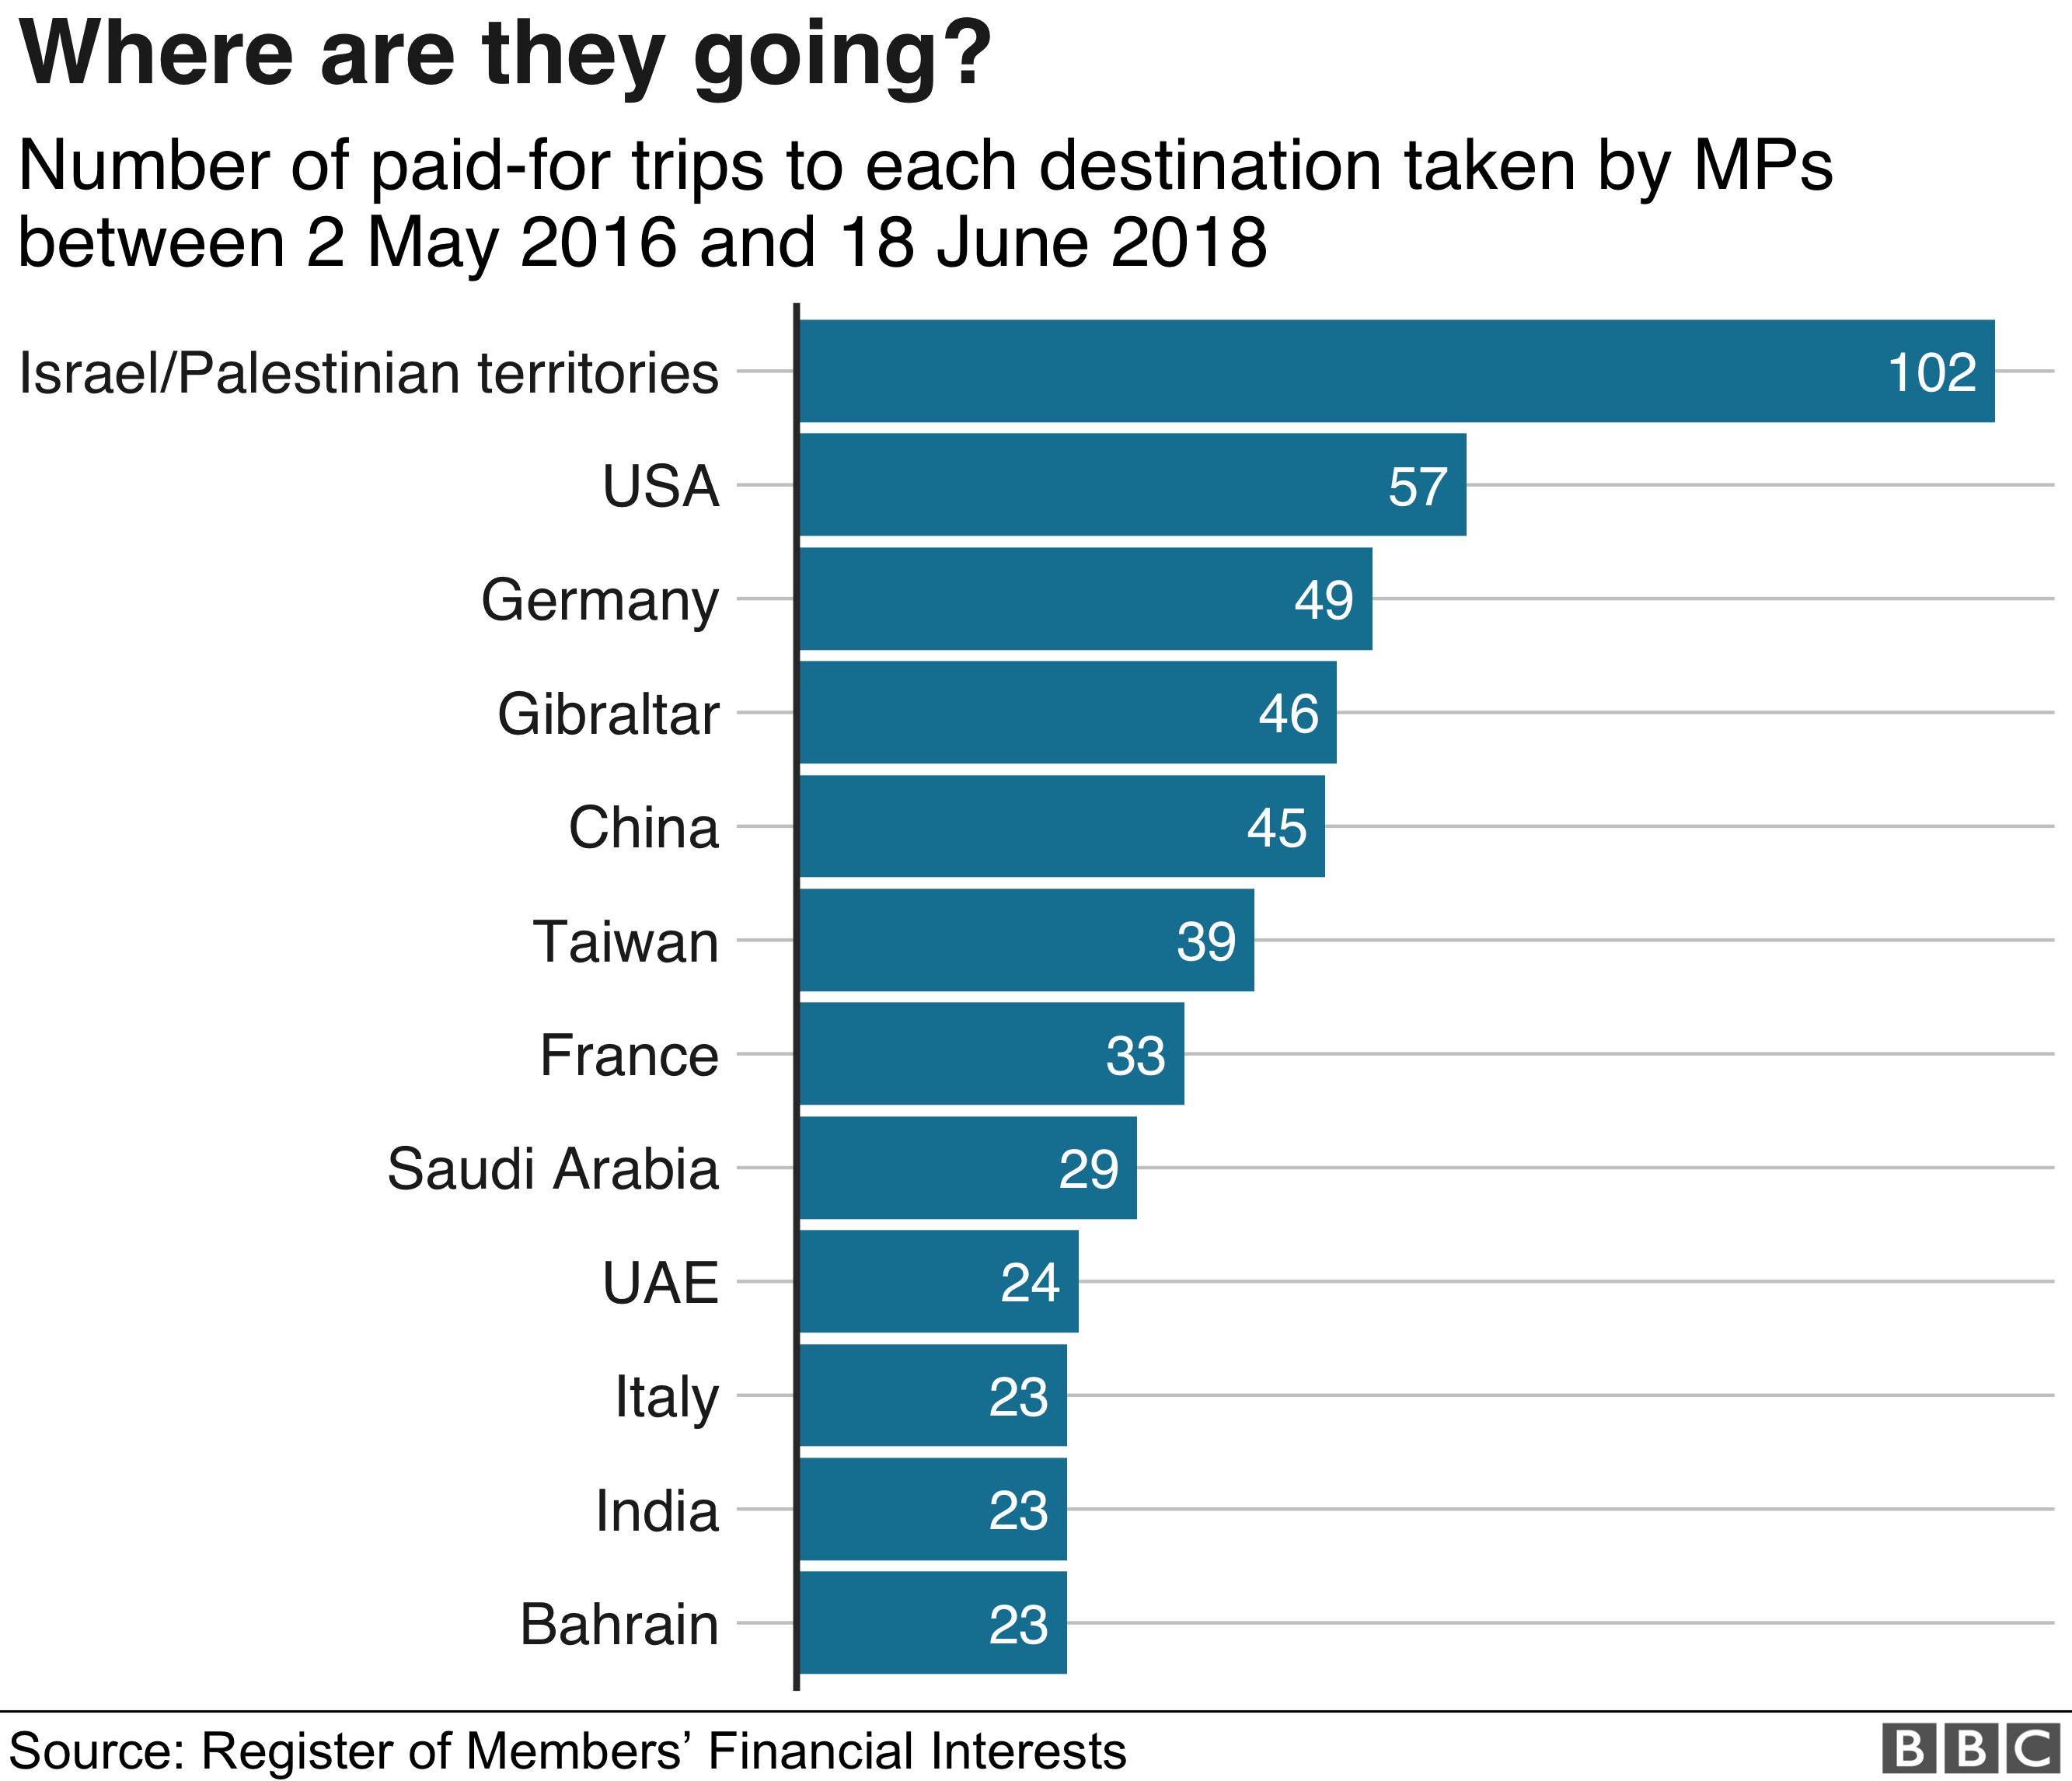 MPs made 102 paid-for trips to Israel and the Palestinian territories over the last two years, more than to any other country